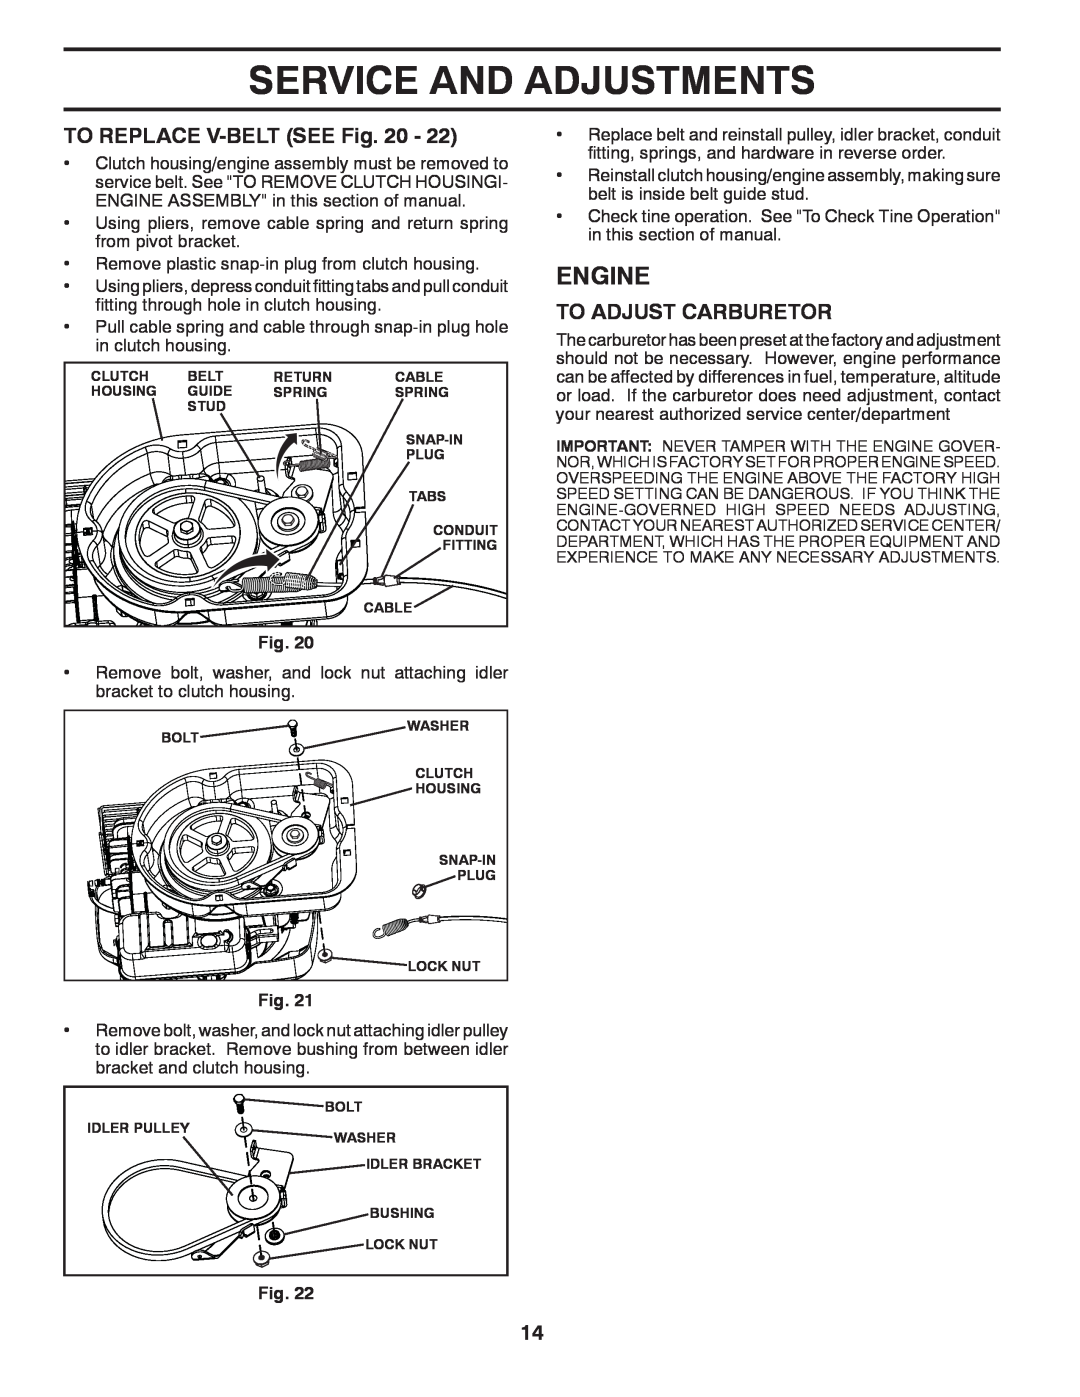 McCulloch 96083000300, 433691, MC550 manual TO REPLACE V-BELT SEE Fig, To Adjust Carburetor, Service And Adjustments, Engine 